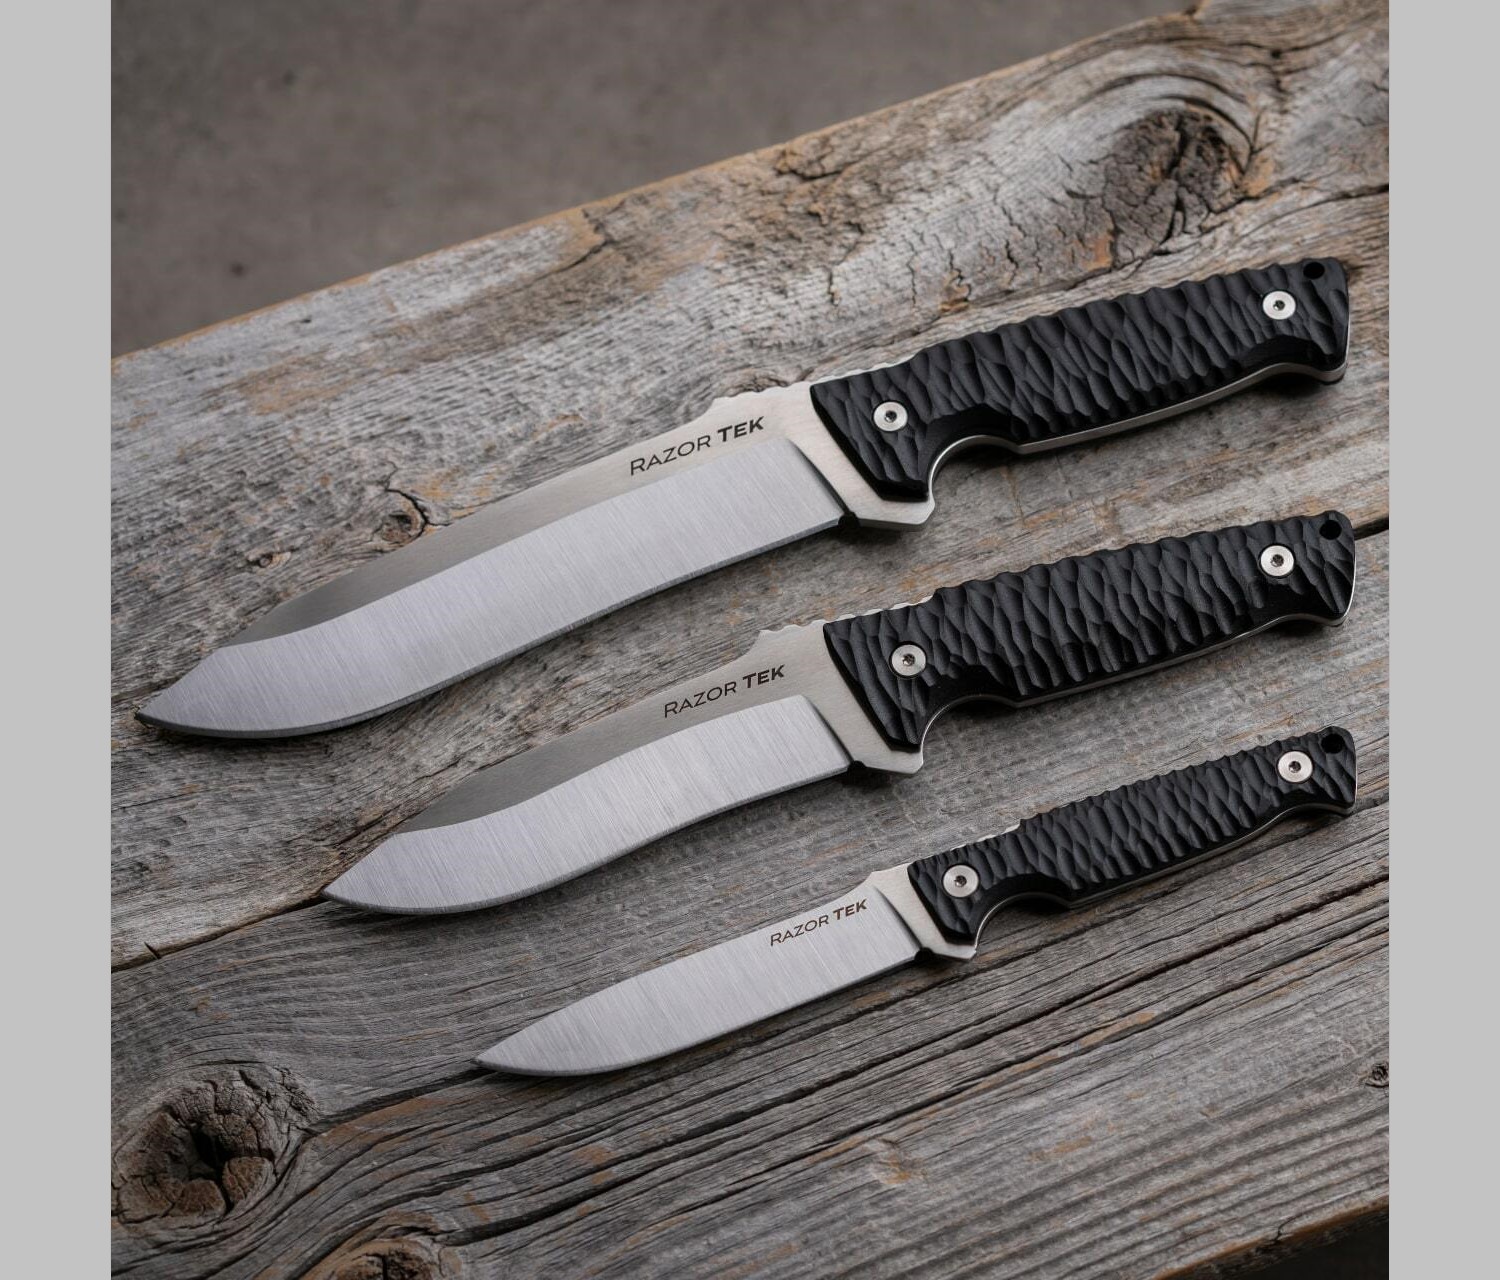 New Fixed Blade Family Arrives from Cold Steel